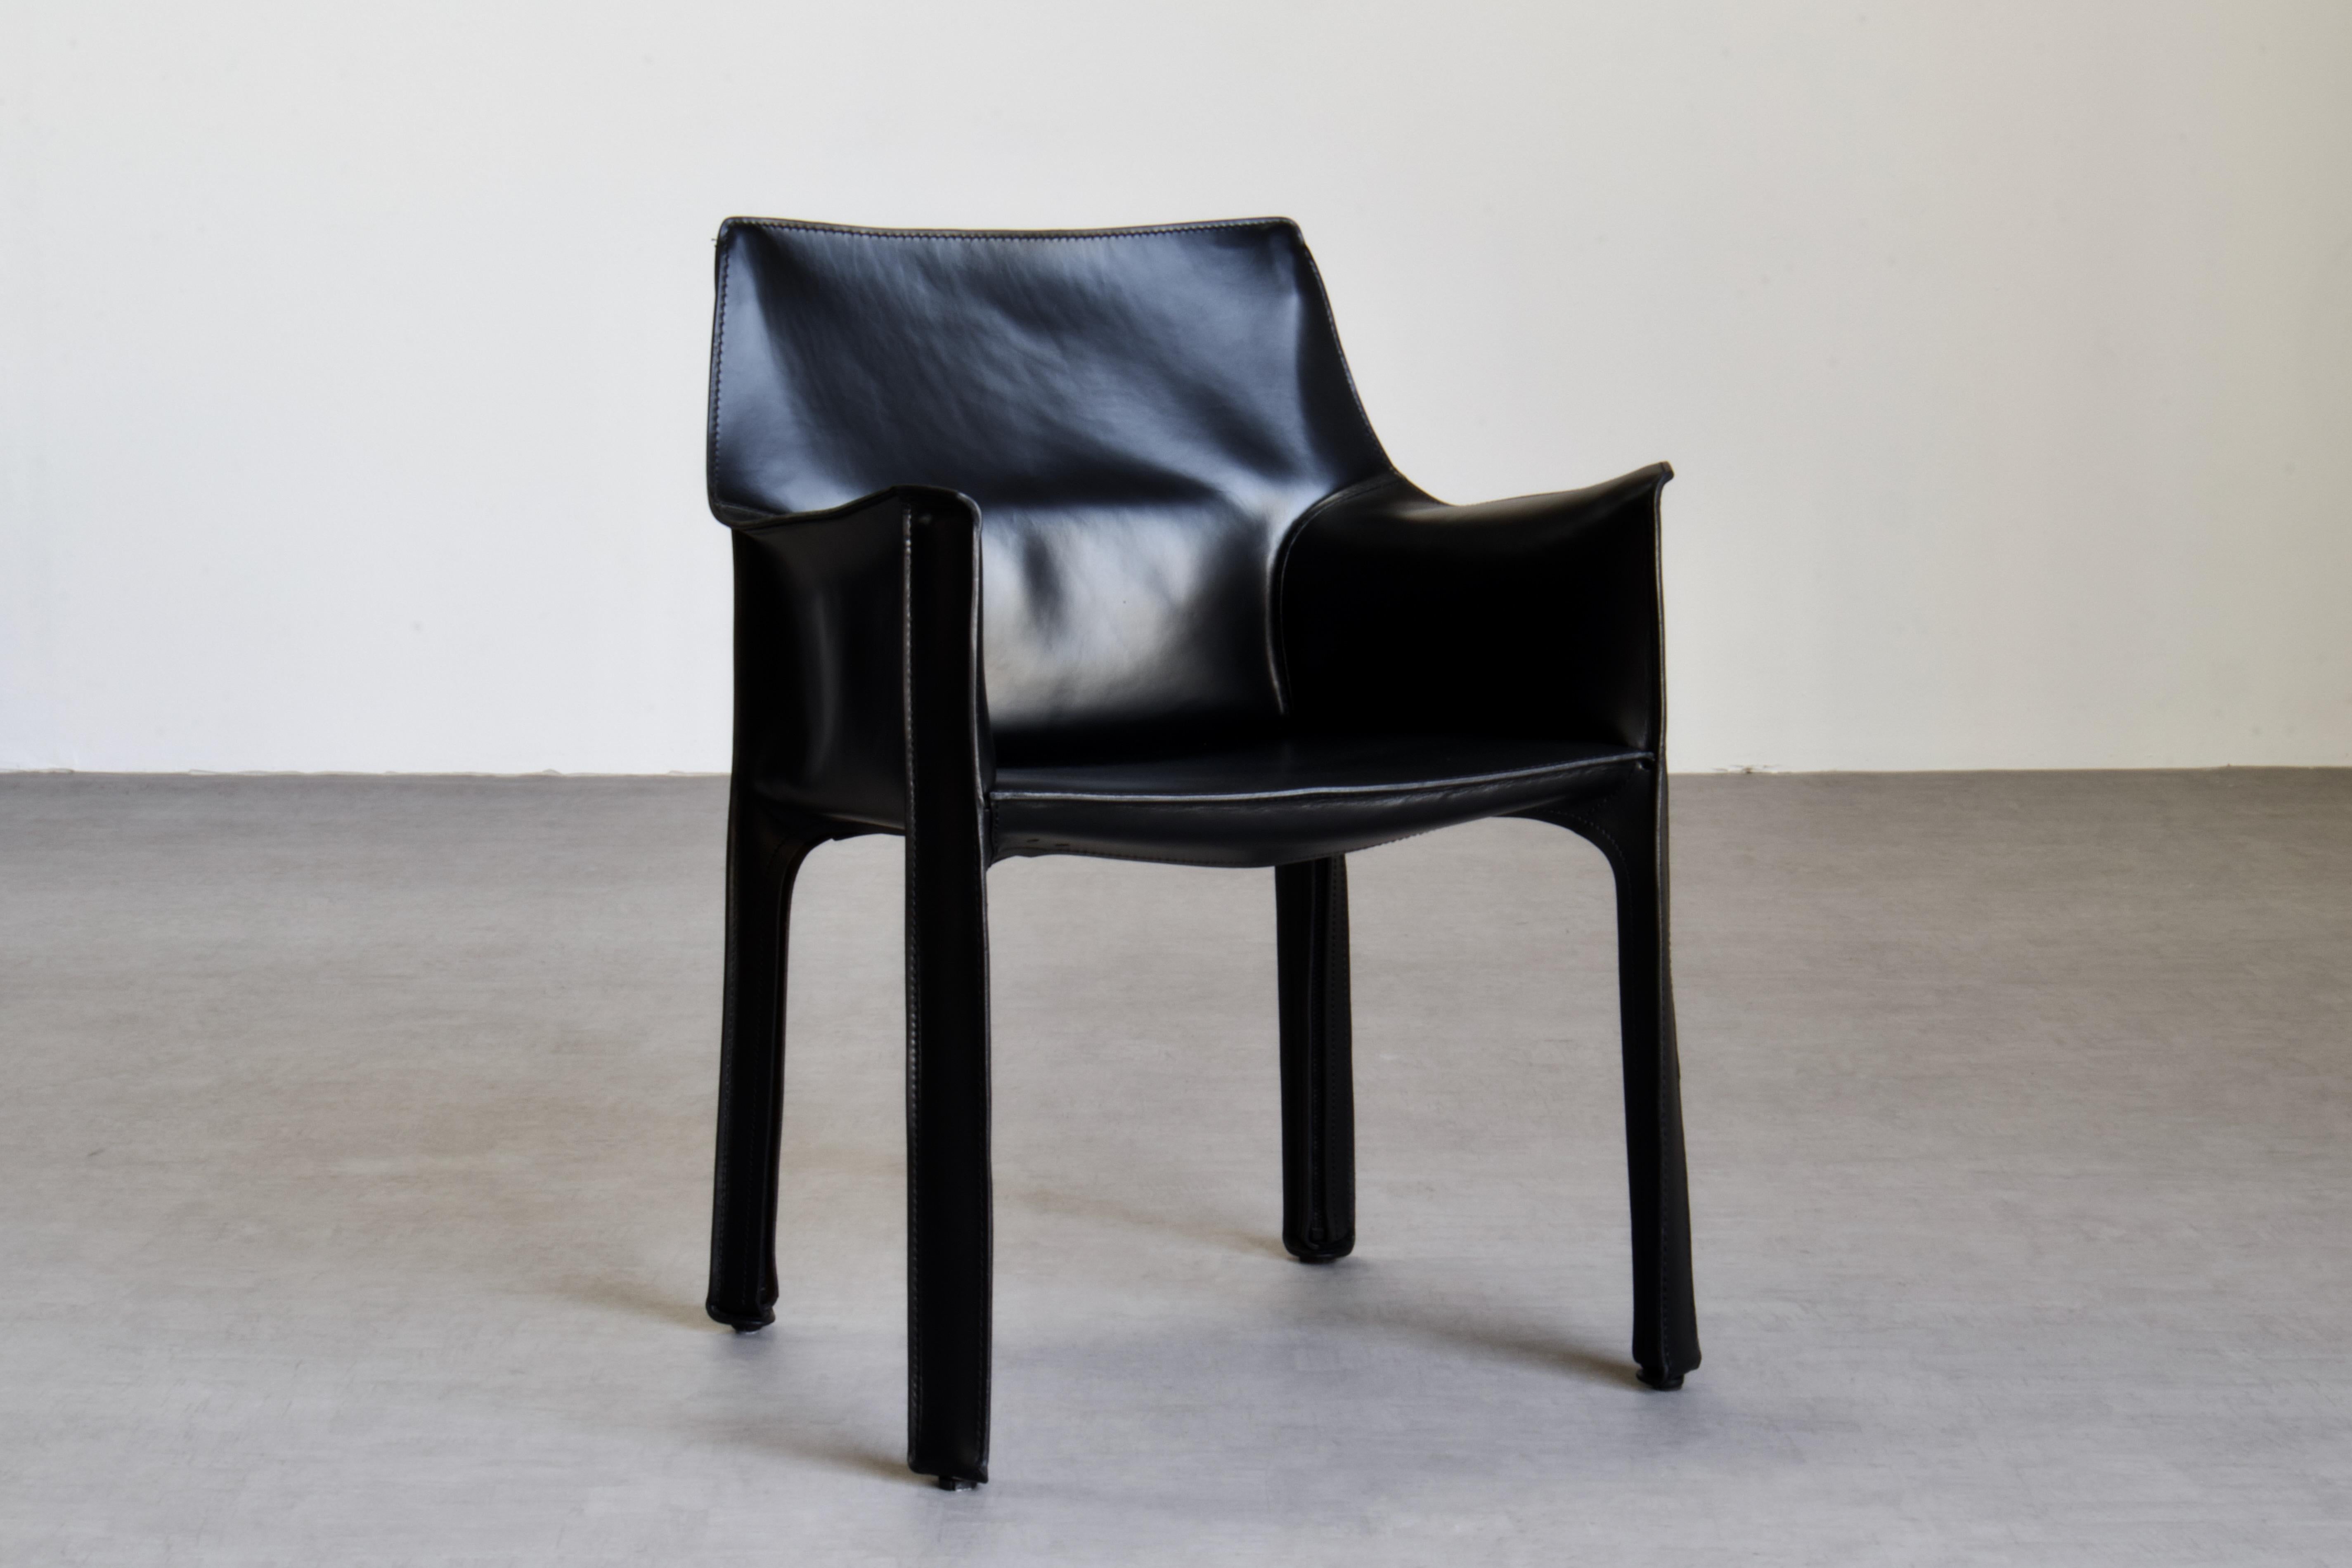 Set of 10 Mario Bellini CAB 413 chairs, made by Cassina. Flexible steel frame covered with a skin of high quality vintage black saddle leather. 

The chairs, which were already in very good condition, have been thoroughly refreshed by our atelier